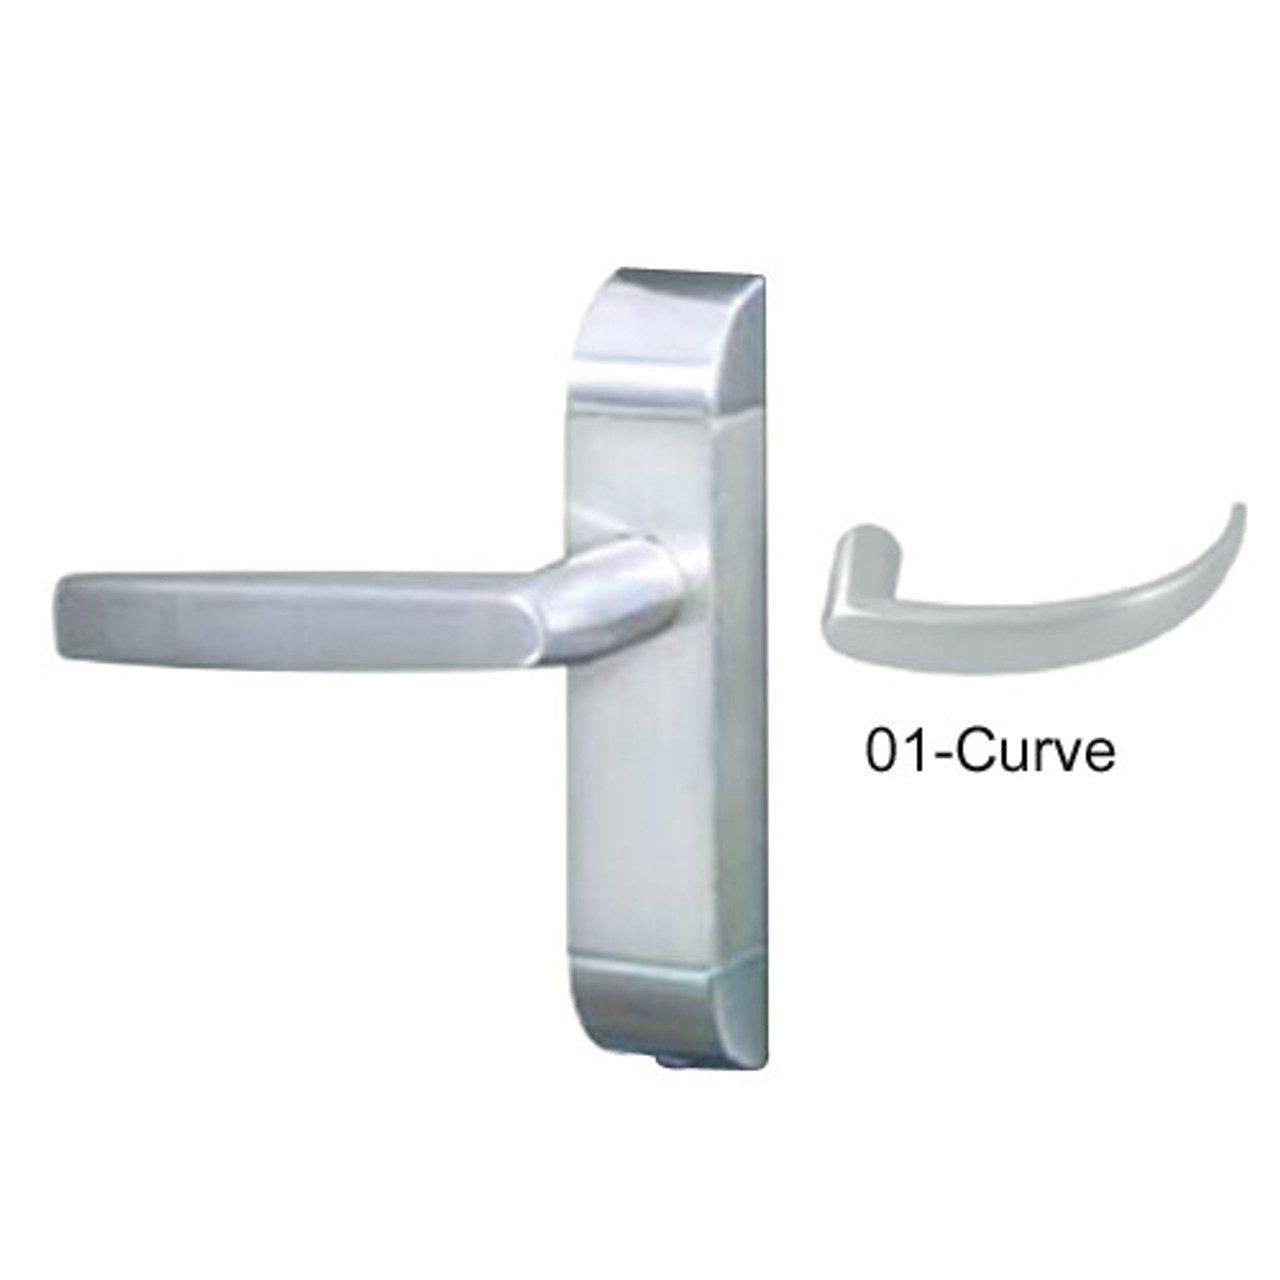 4600-01-531-US32 Adams Rite Heavy Duty Curve Deadlatch Handles in Bright Stainless Finish